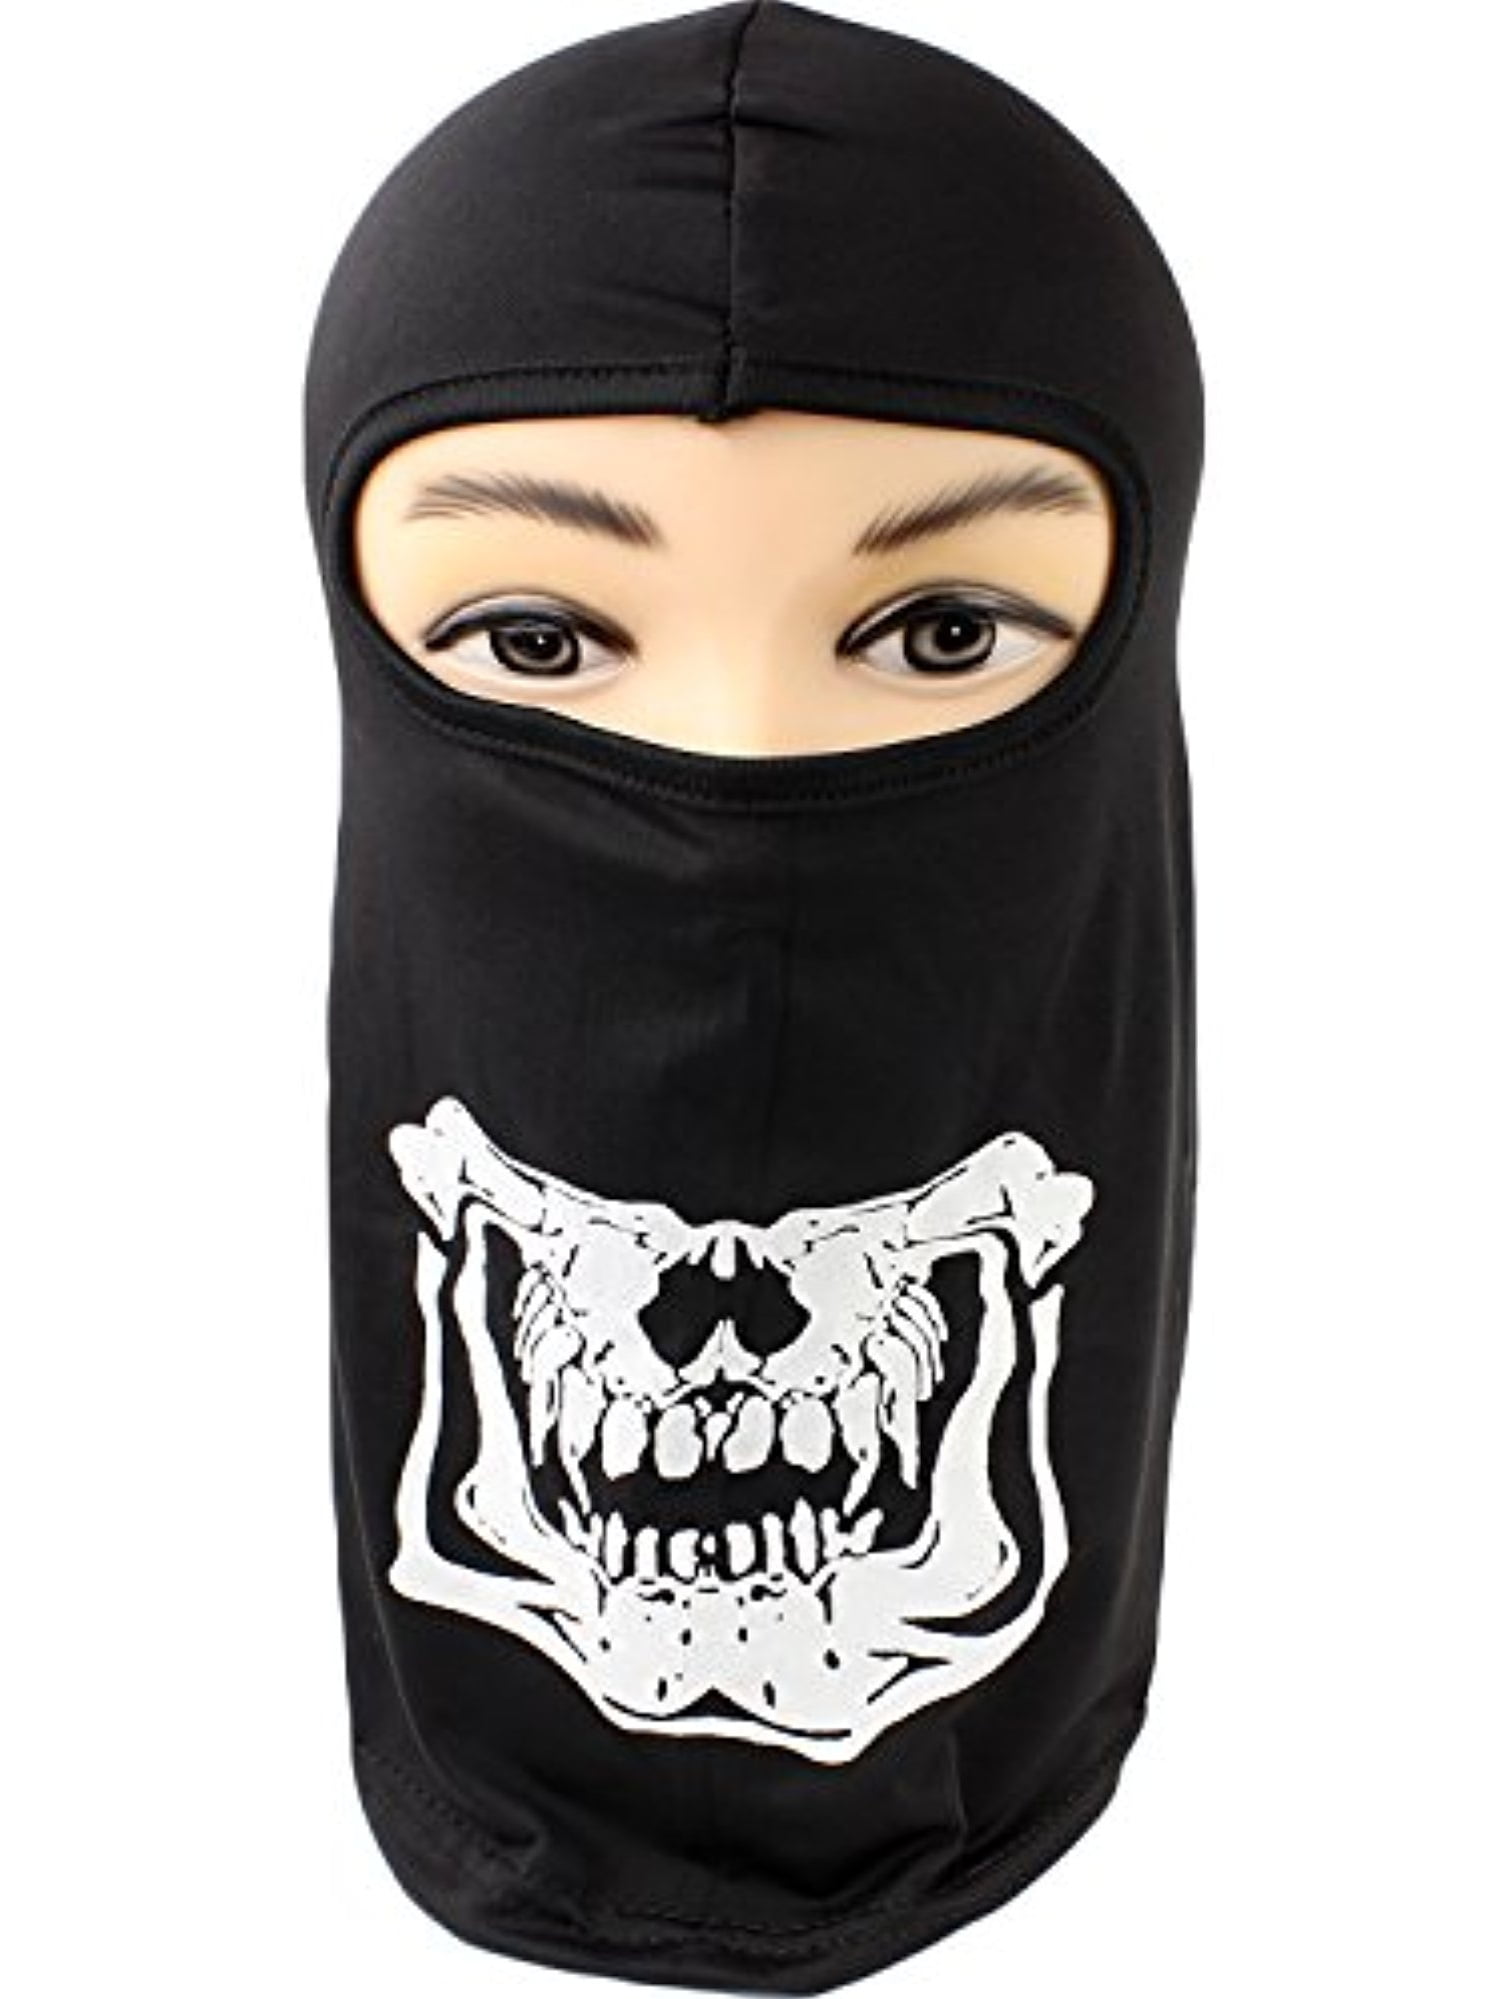 Black Motor Balaclava Multi functional For Protection Against Colds And Bugs